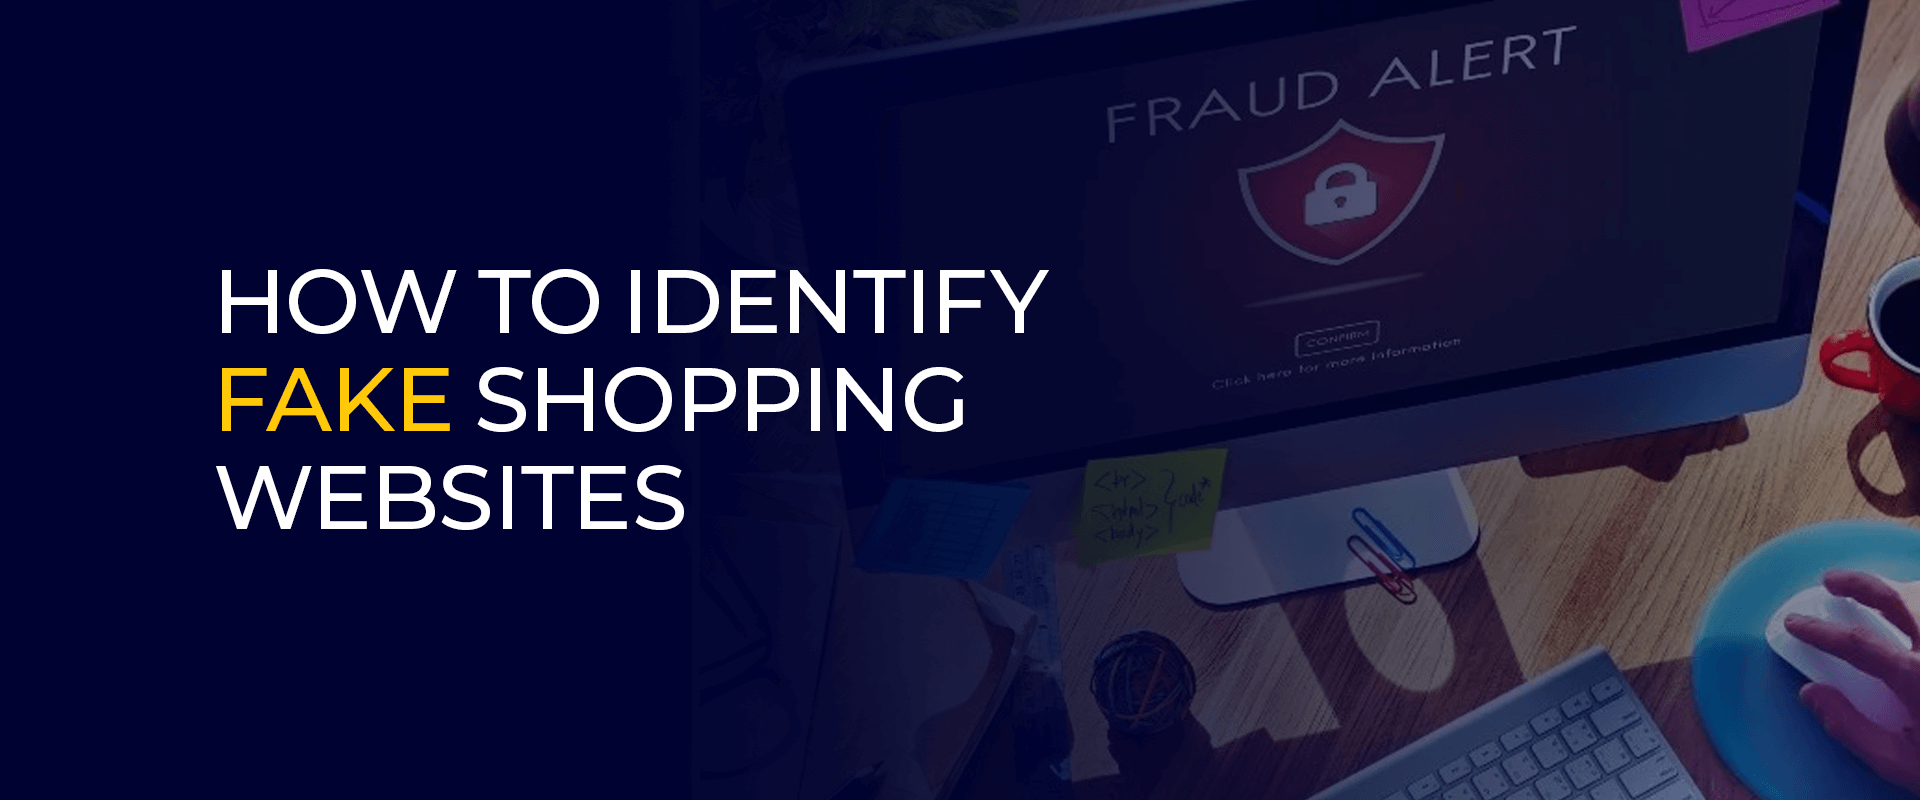 How to identify fake shopping websites